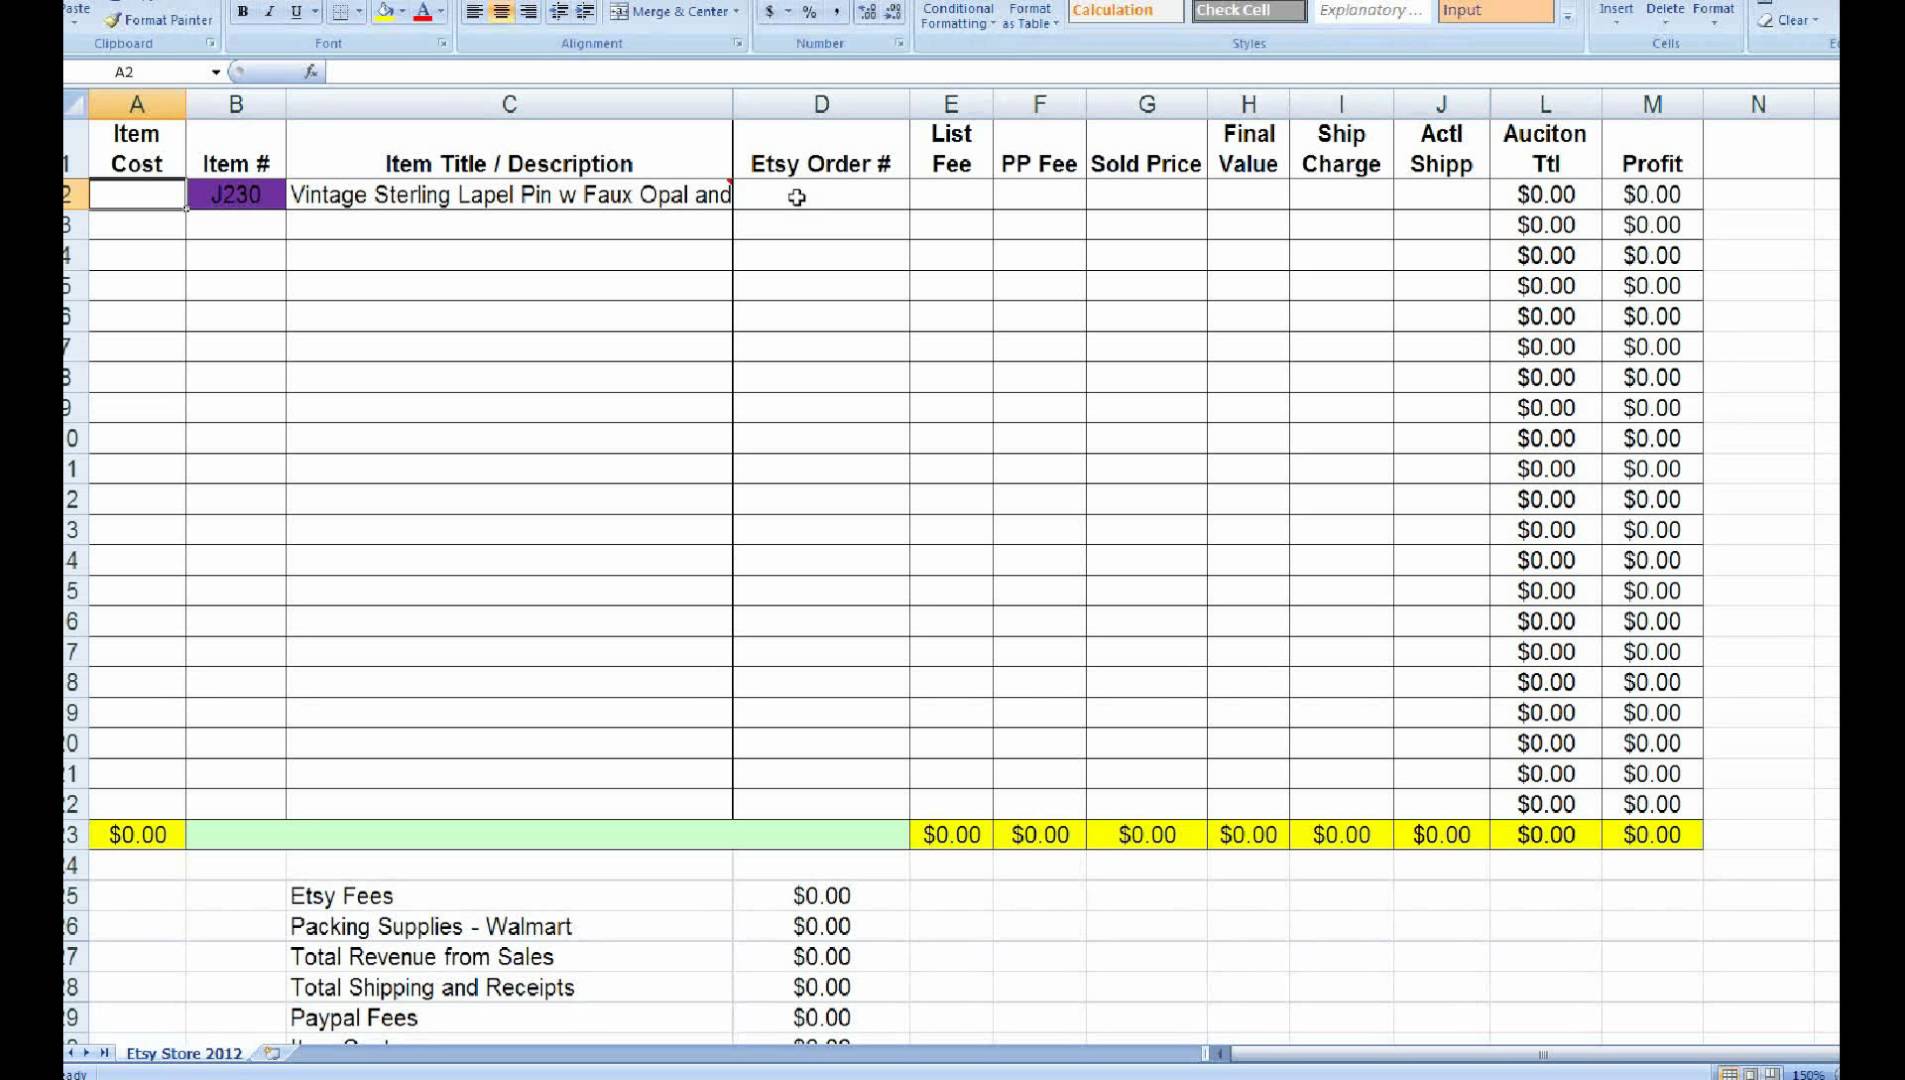 Sample Of Jewelry Inventory Excel Spreadsheet Within Jewelry Inventory Excel Spreadsheet Format